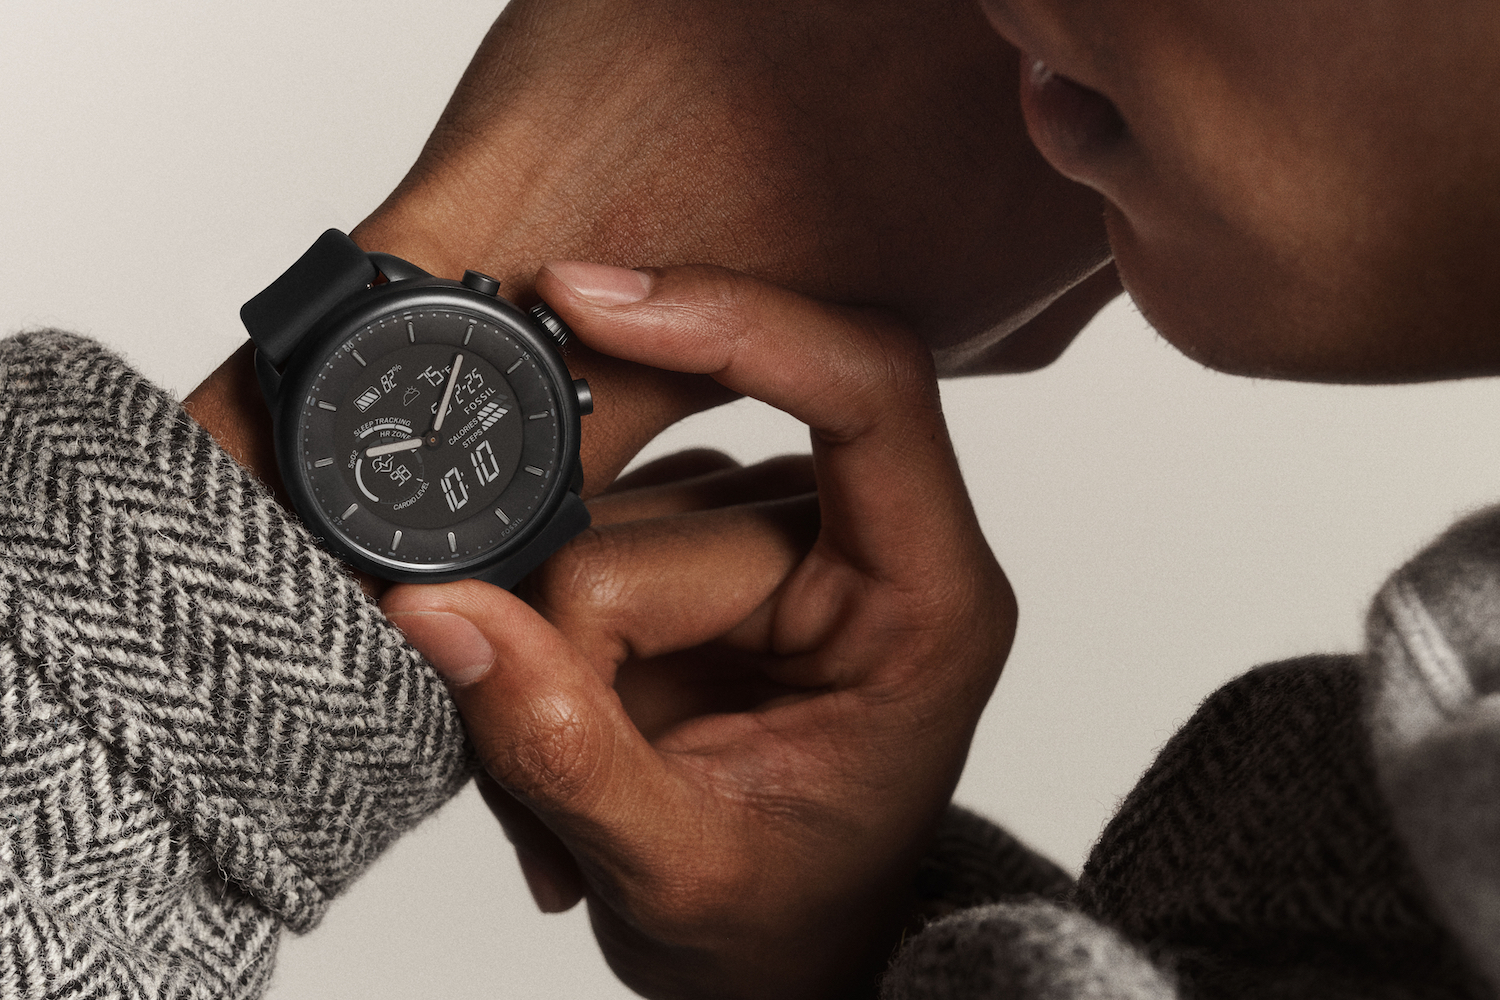 CES 2023: Fossil's new Hybrid watch is the anti-Pixel Watch | Digital Trends